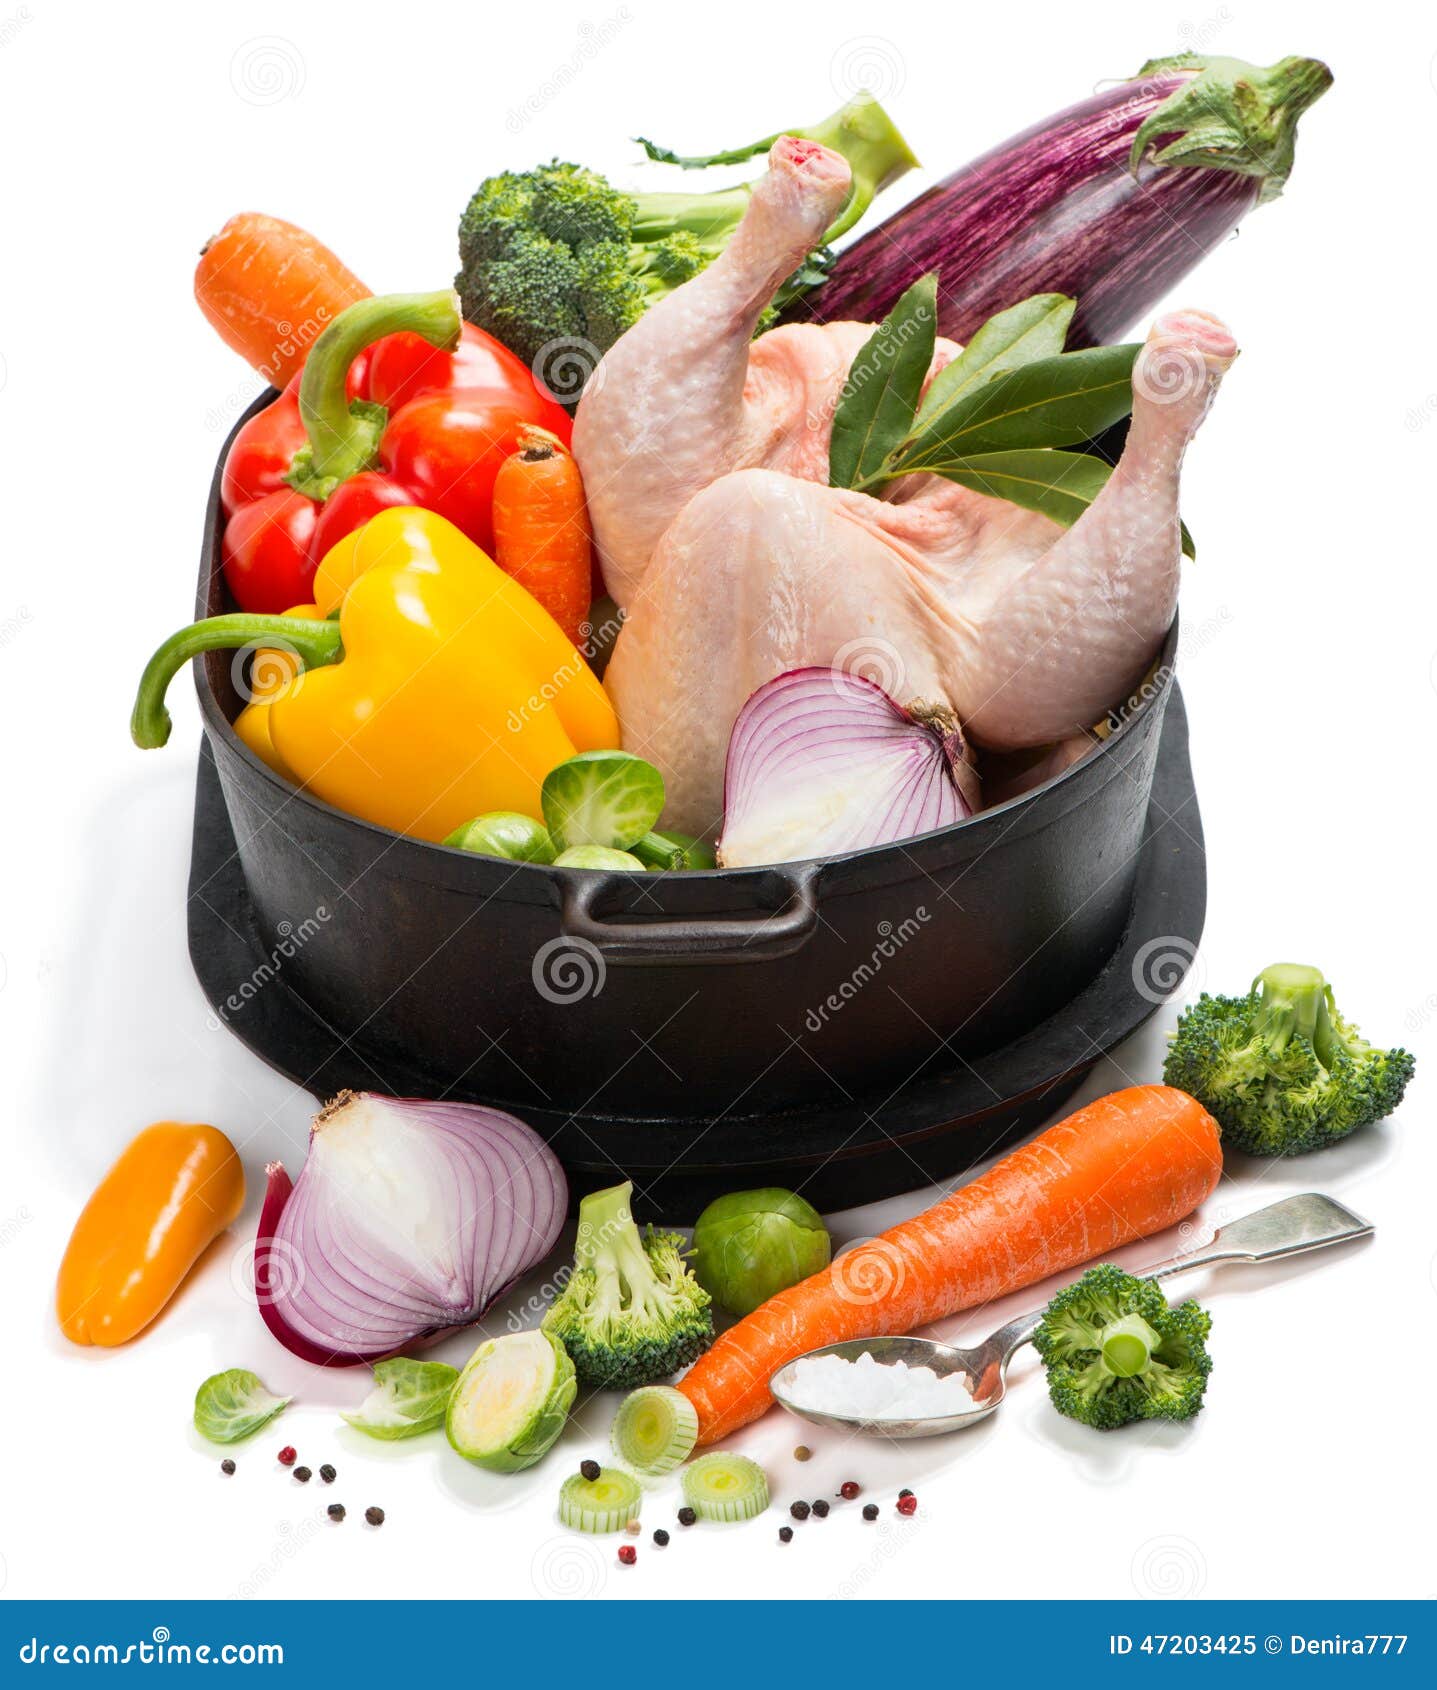 Raw Whole Chicken with Vegetables Stock Image - Image of food, cooking ...